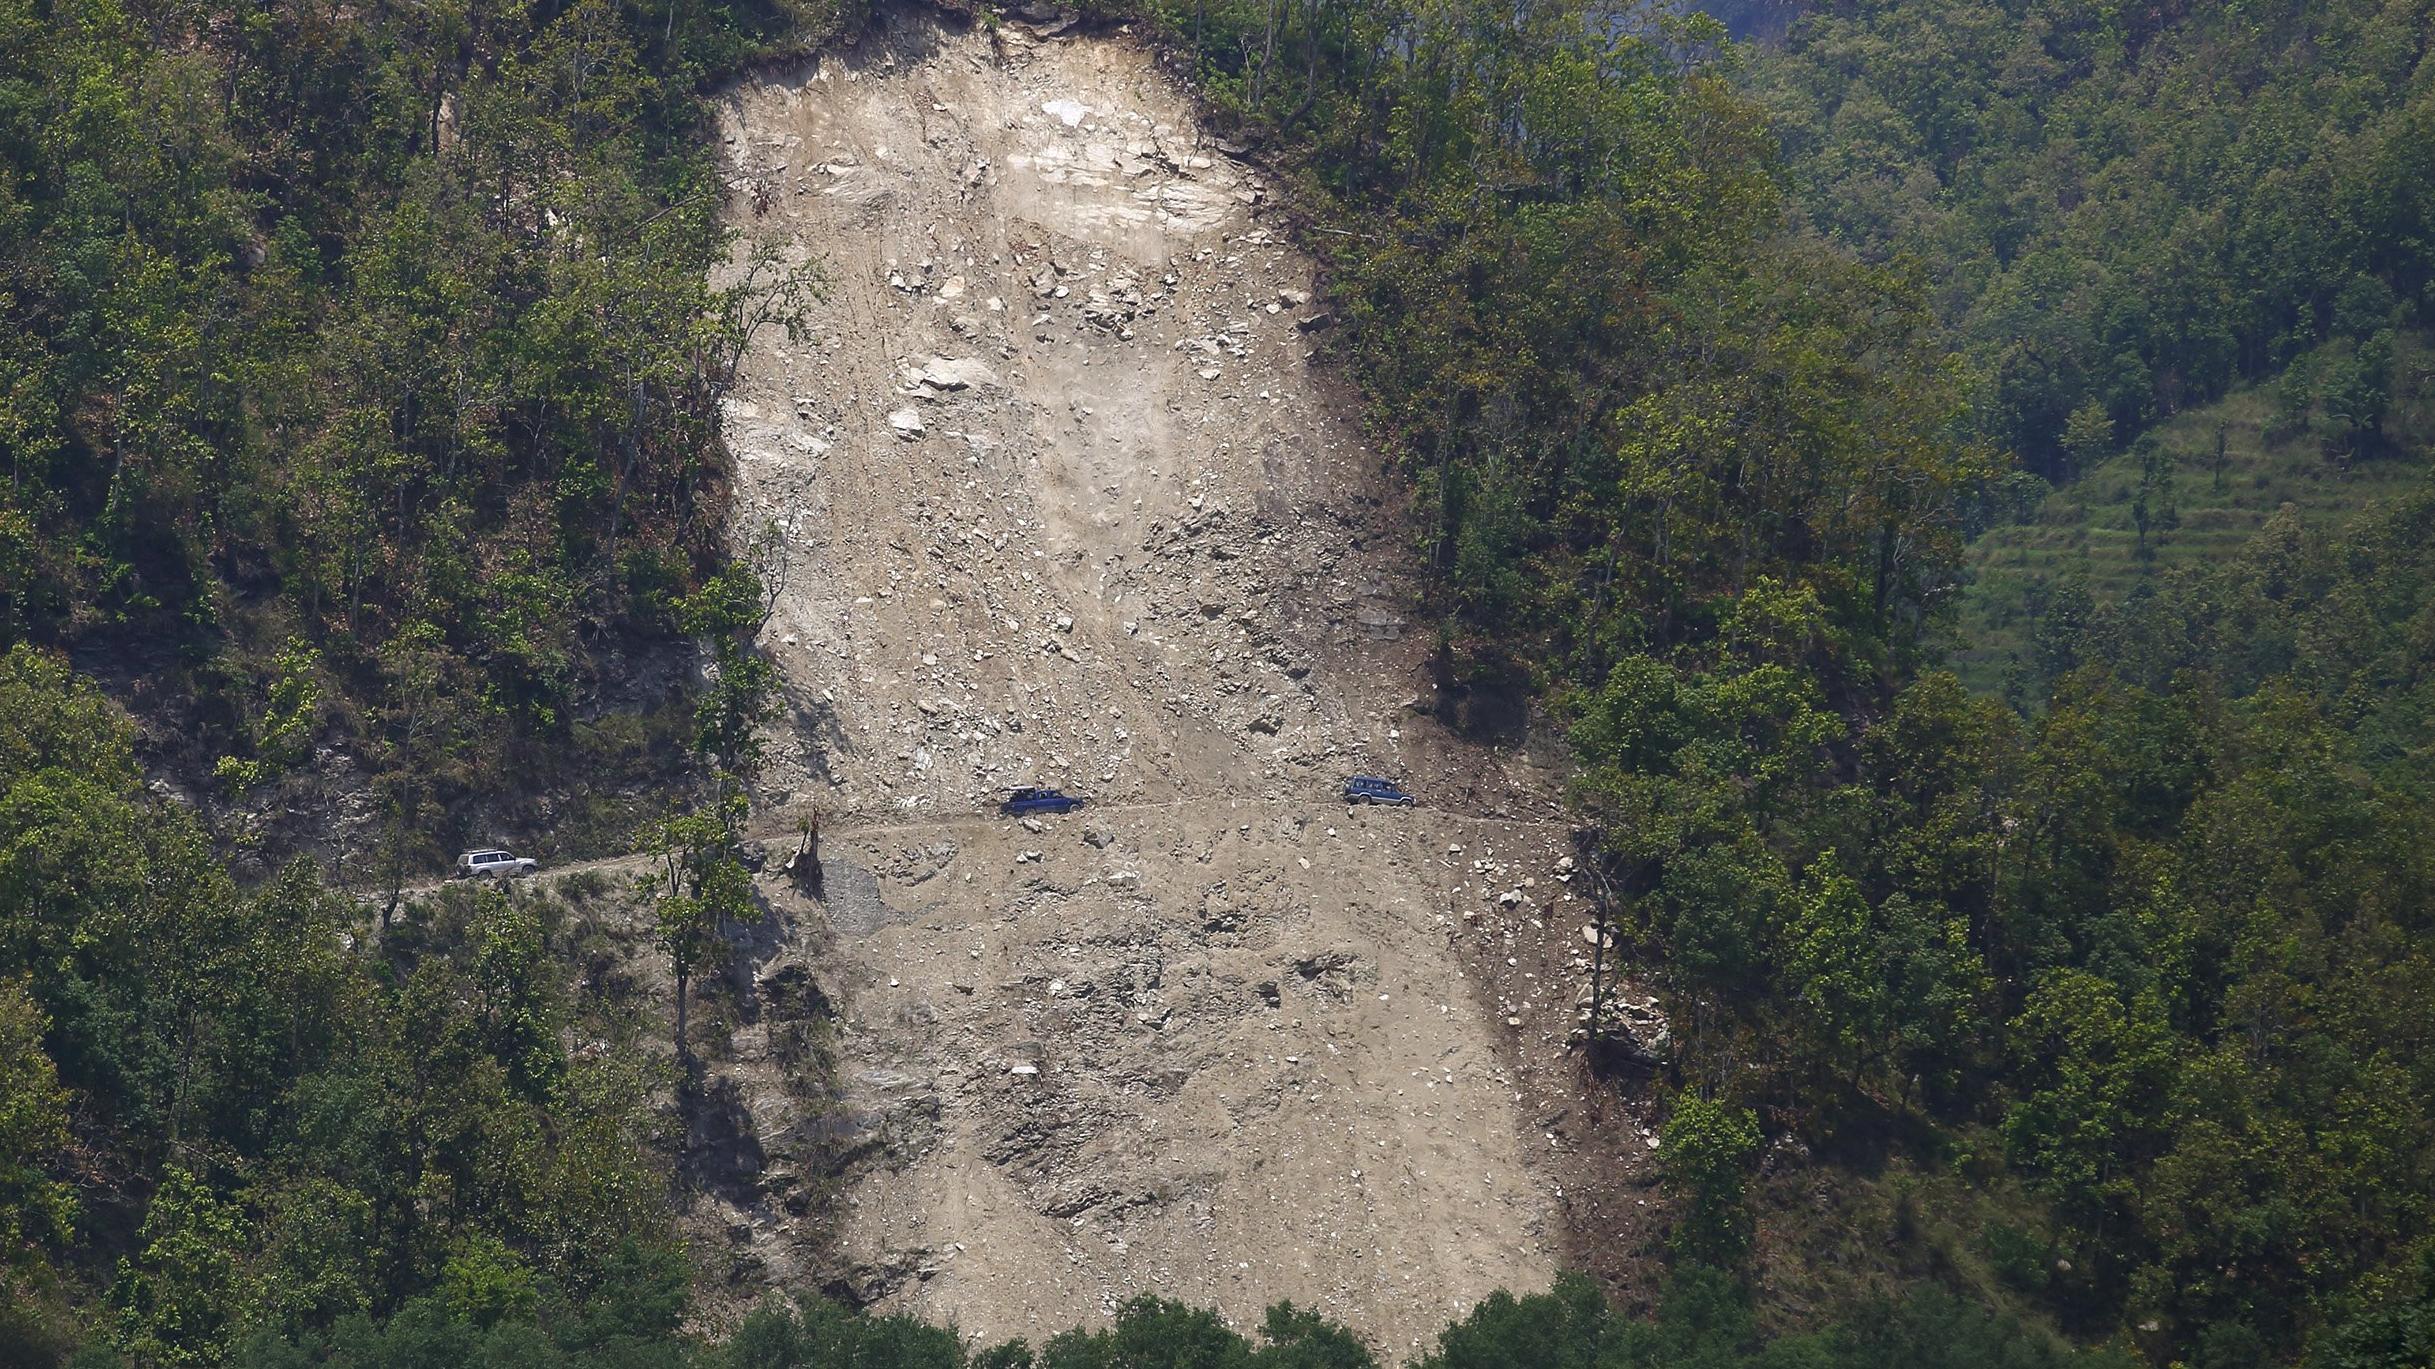 Vehicles pass by a landslide area after the earthquake in Gorkha district May 20, 2015.